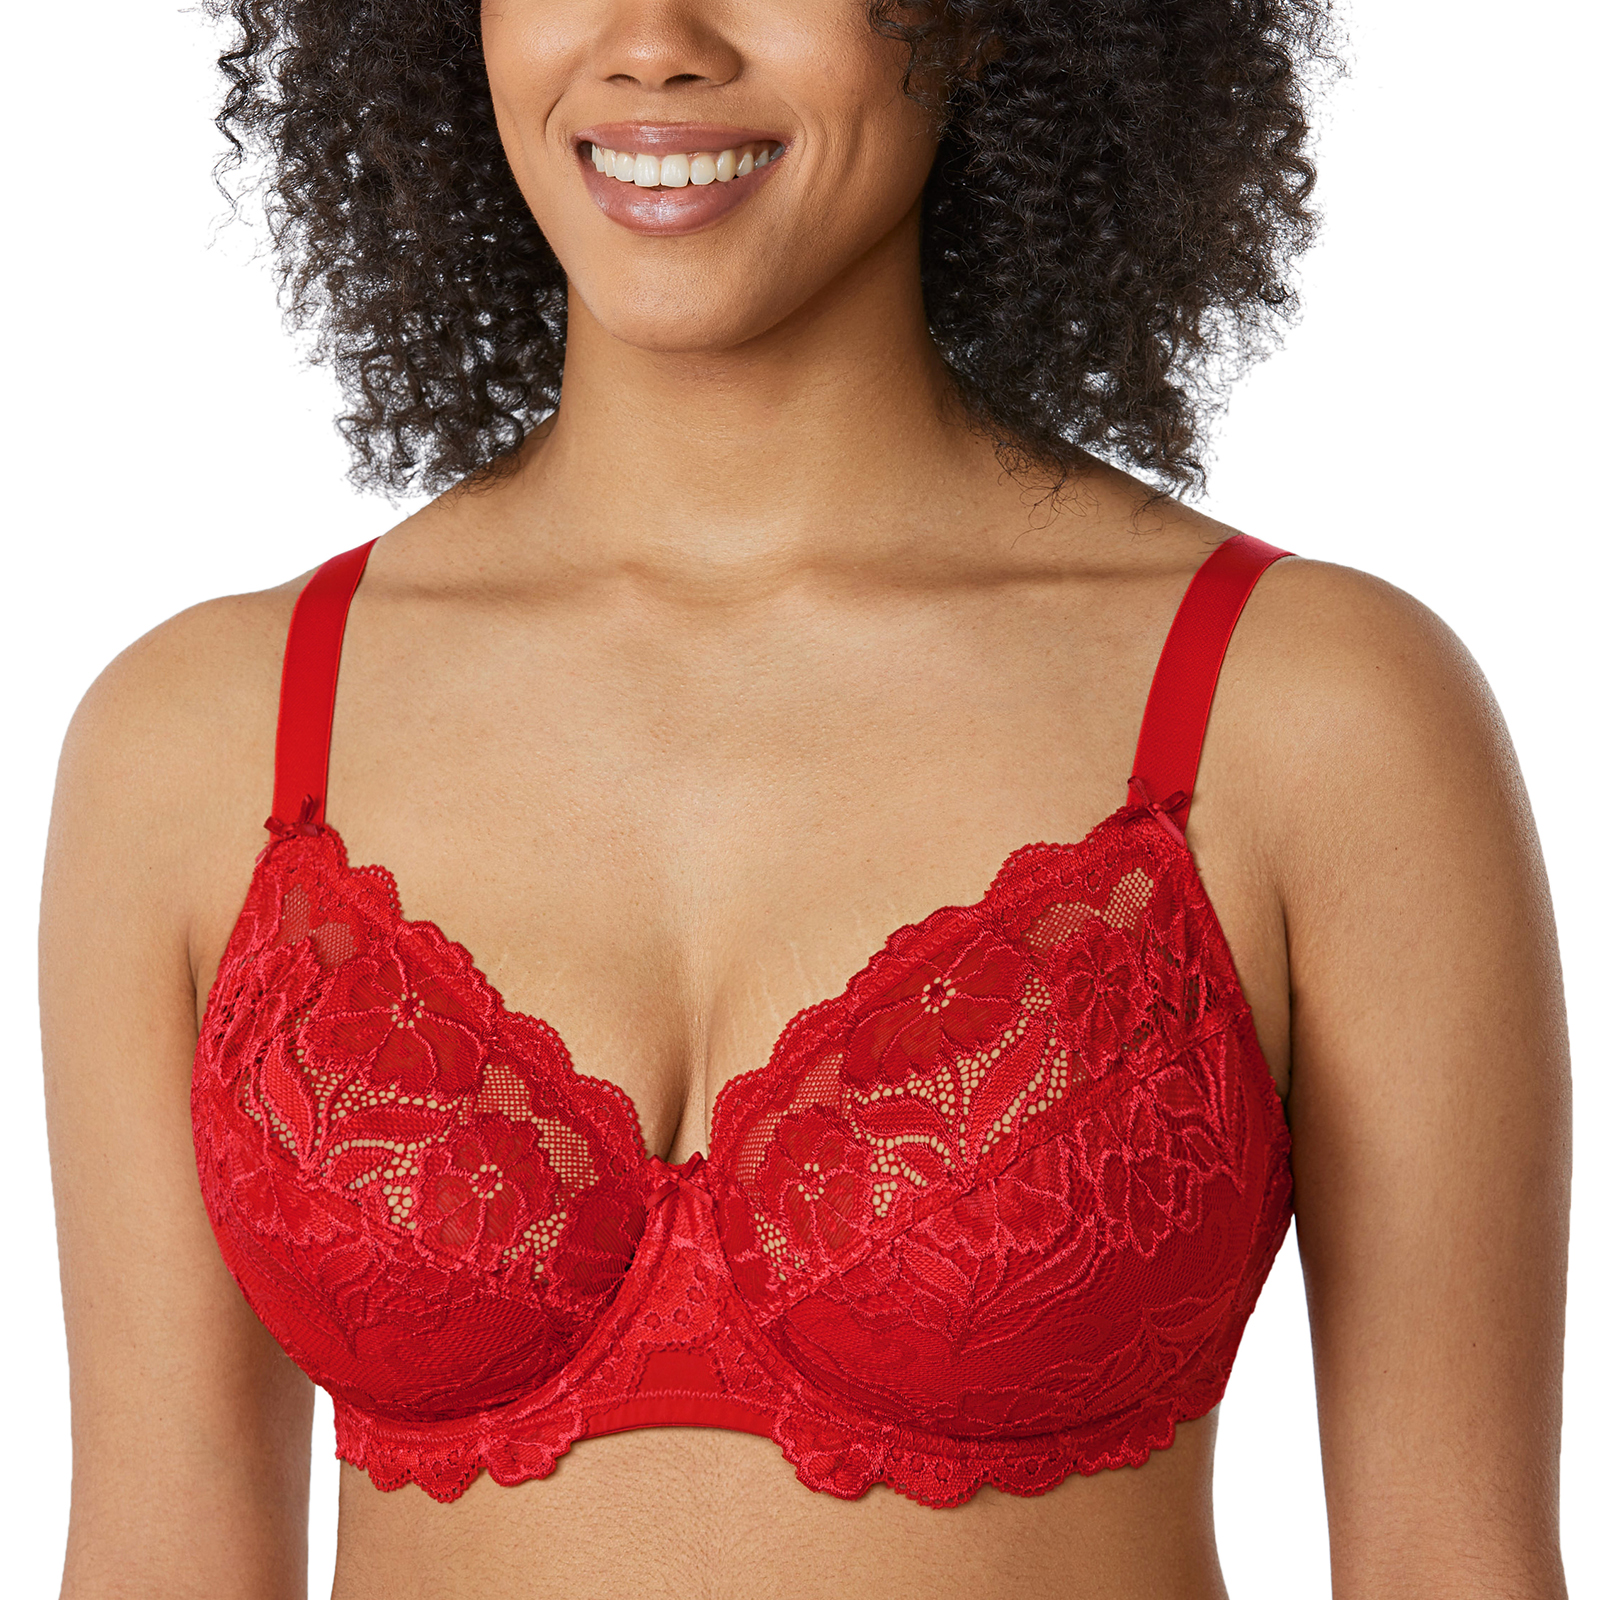  DELIMIRA Womens Wireless Plus Size Lace Bra Unlined Full  Coverage Comfort Cotton Smoke Fills The Air